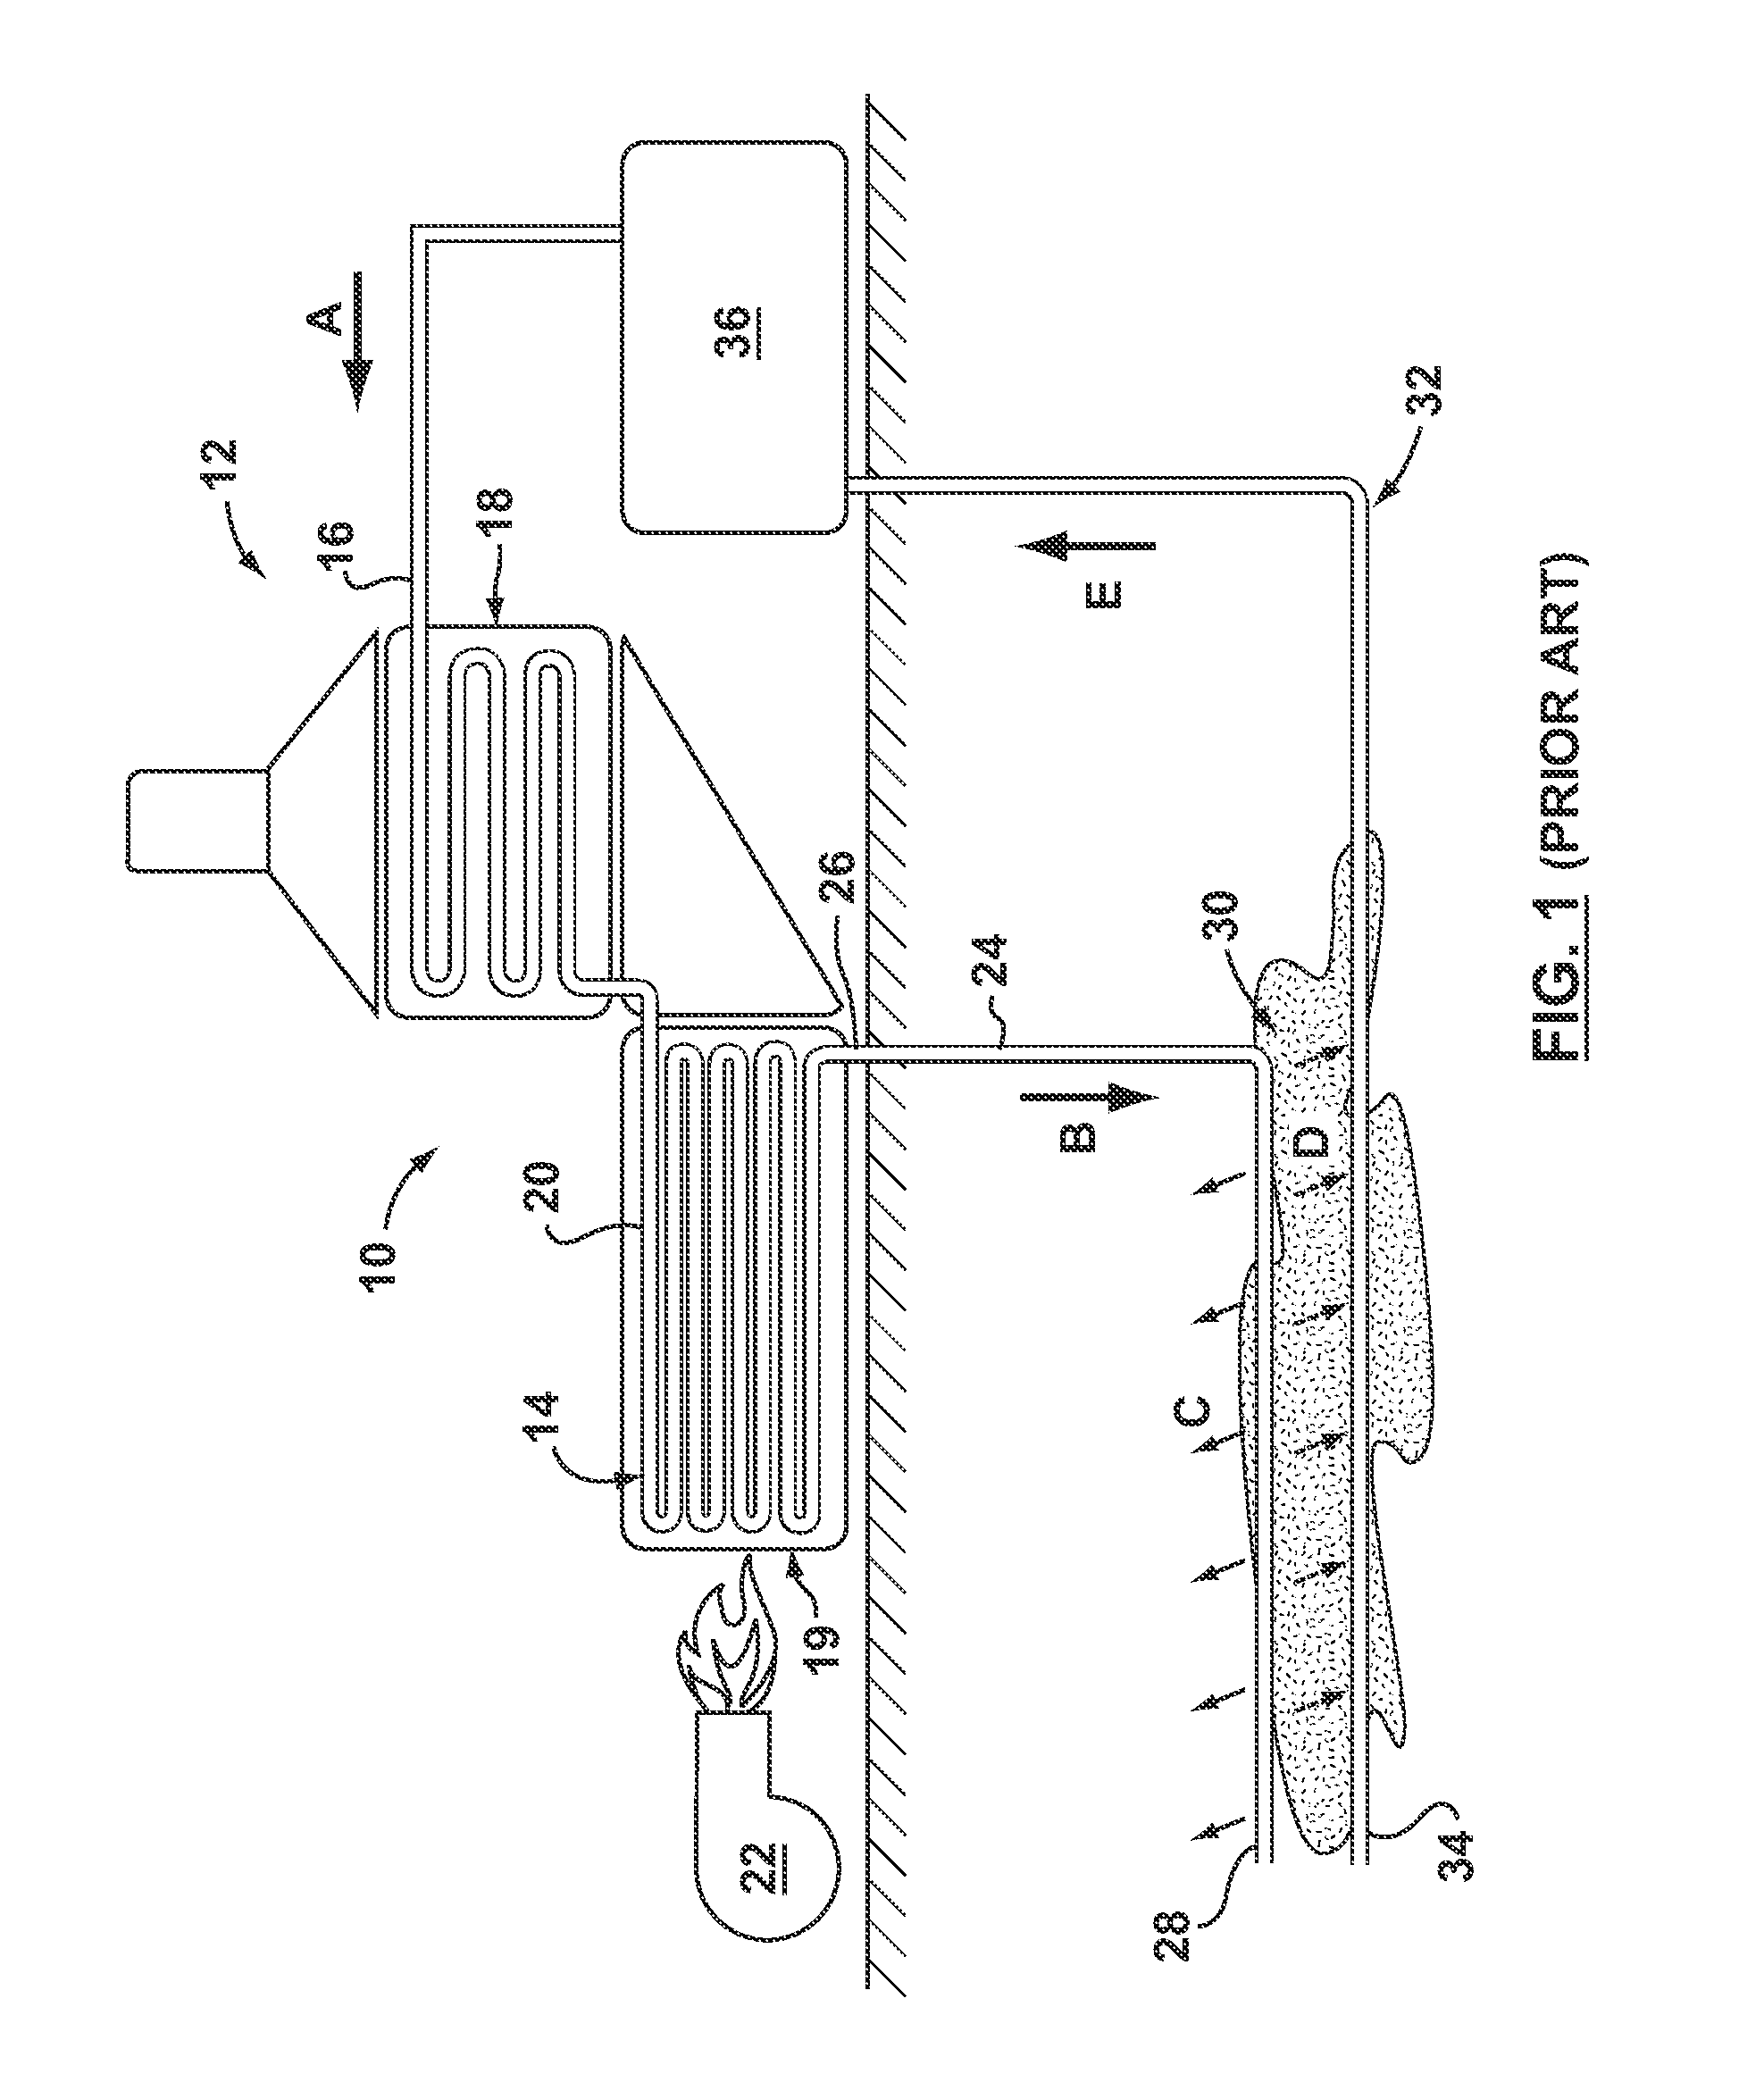 System and method for enhanced oil recovery with a once-through steam generator